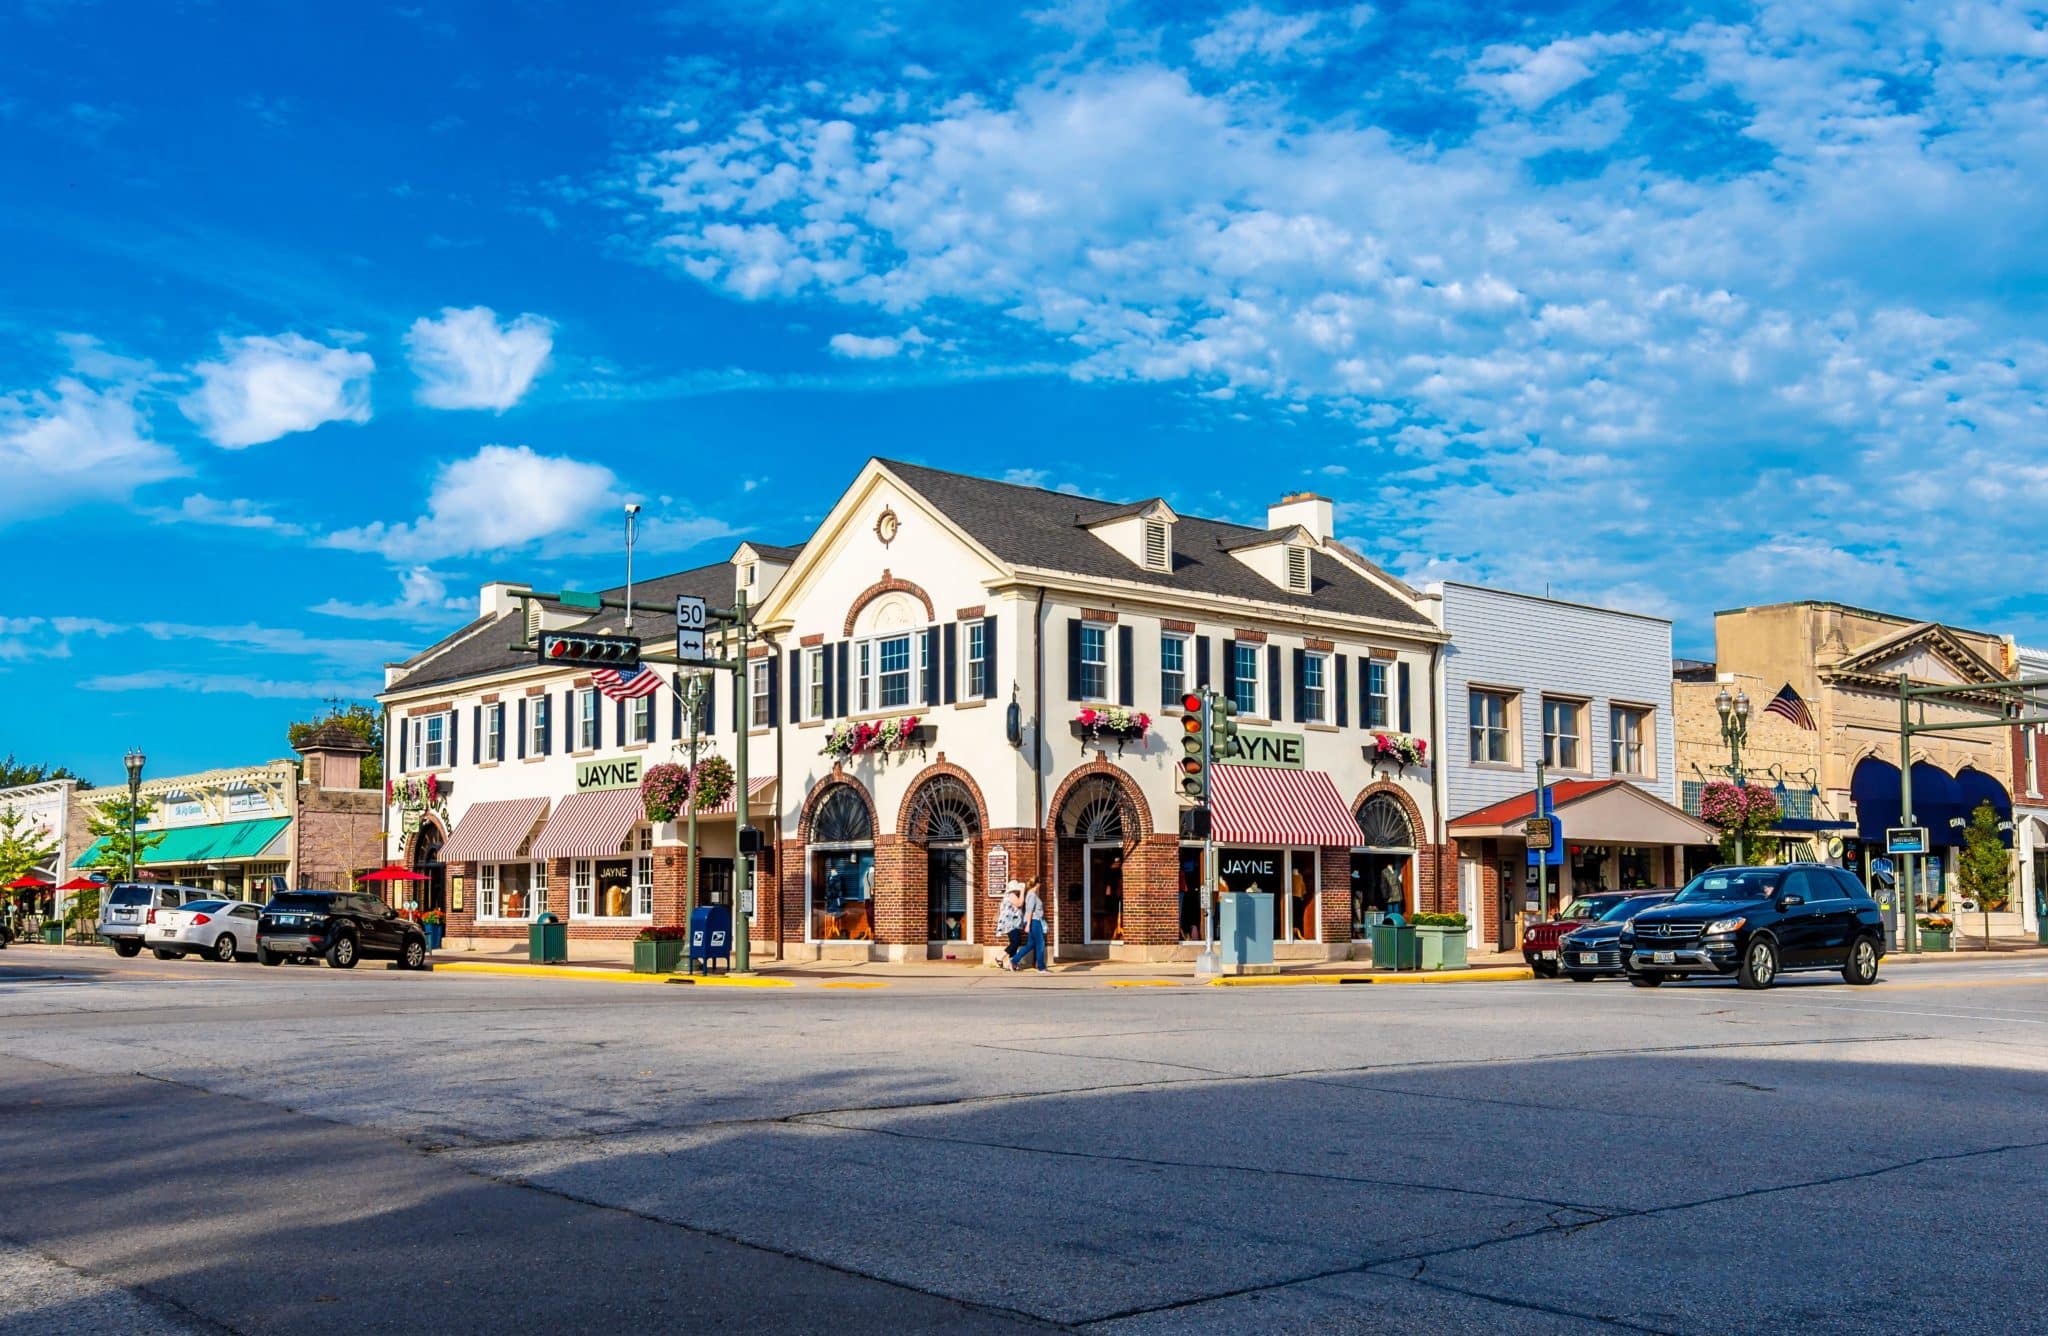 10 Best Charming Small Towns Near Chicago To Visit Right Now